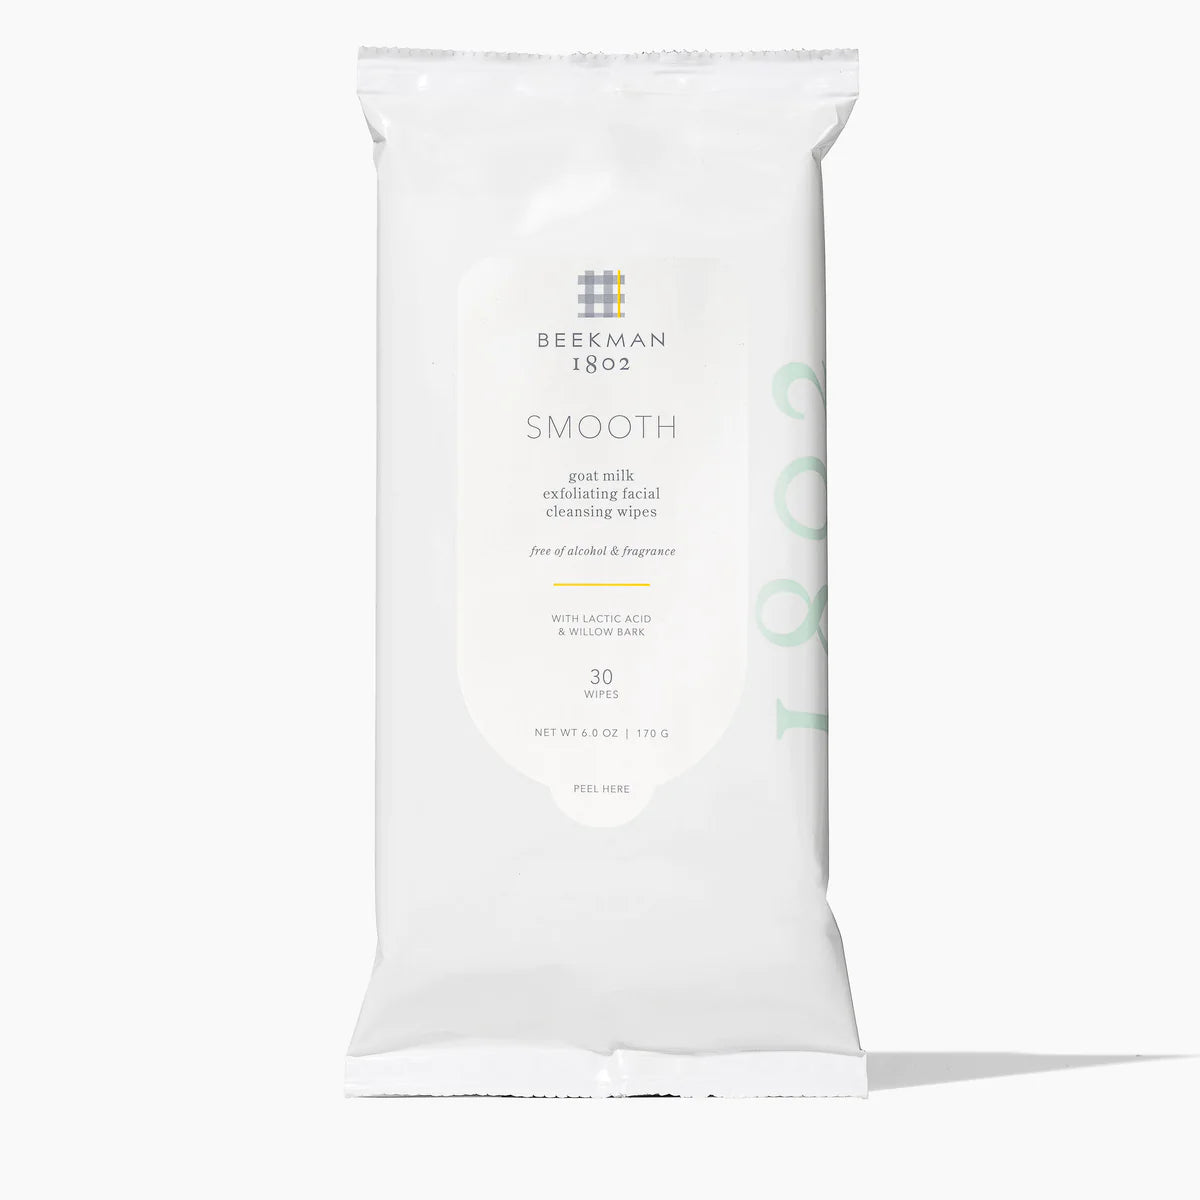 Smooth Lactic Acid & Willow Bark Facial Cleansing Wipes